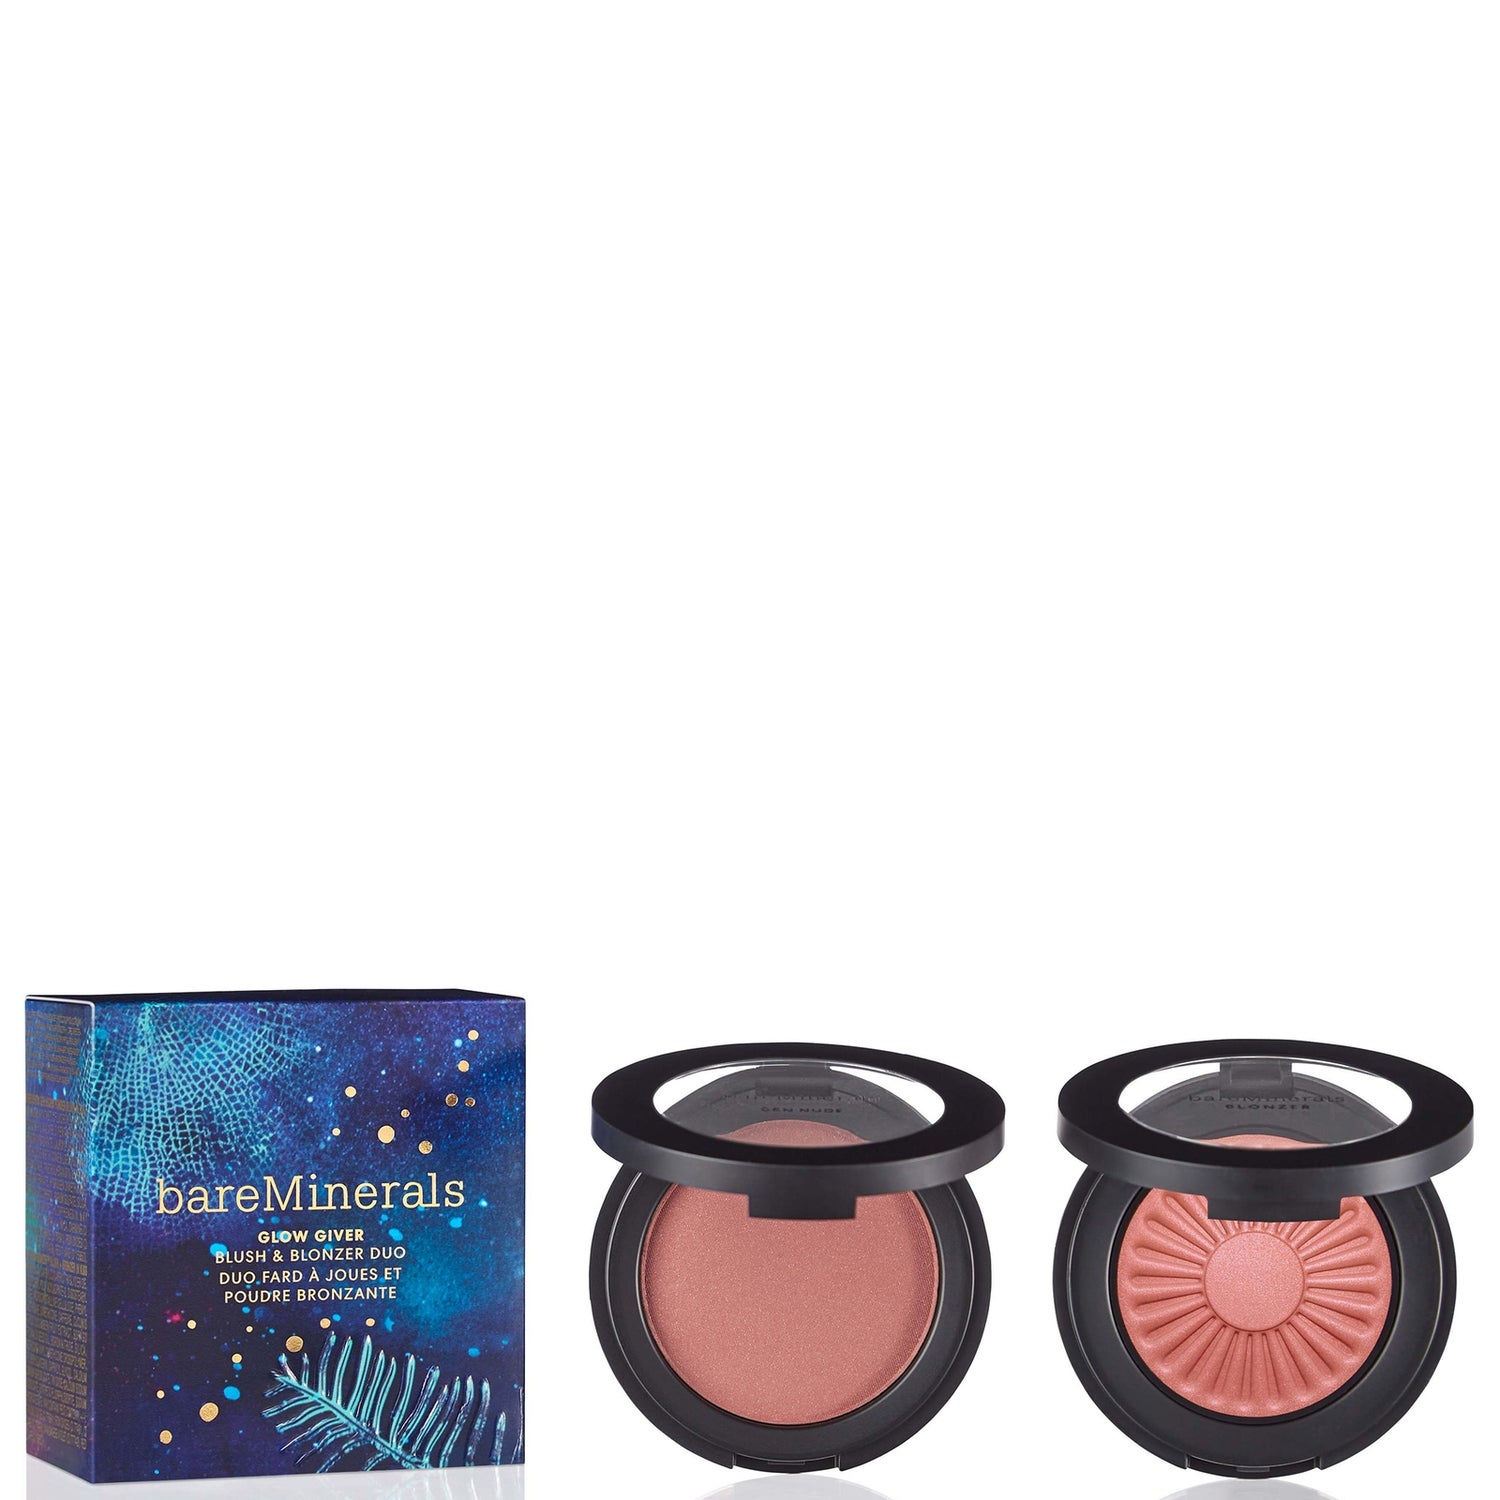 Bareminerals Holiday 2023 Glow Giver, Gen Nude Cheek Duo (Worth £51.00)